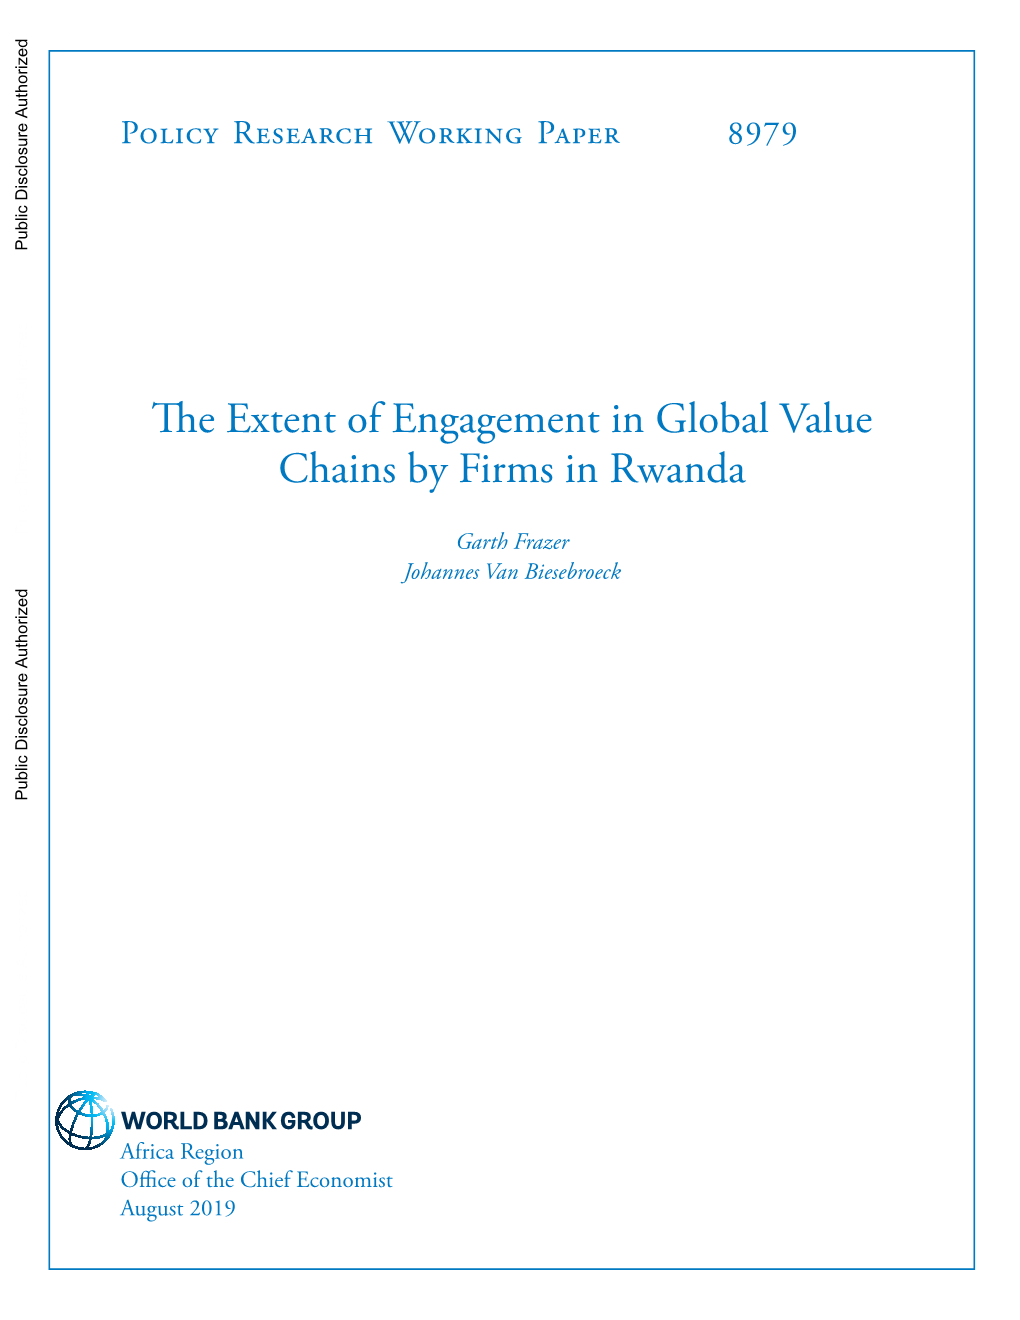 The Extent of Engagement in Global Value Chains by Firms in Rwanda